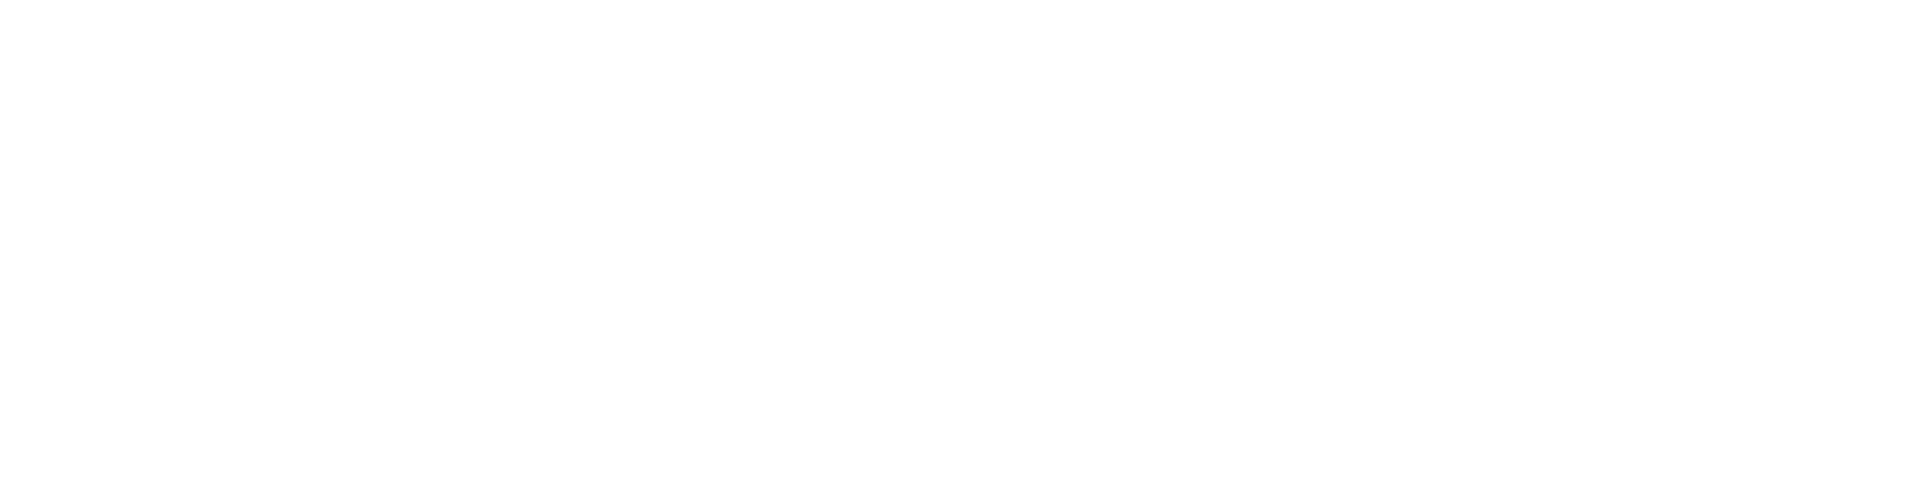 The Scuffed Series 7 - Rounded Blocking